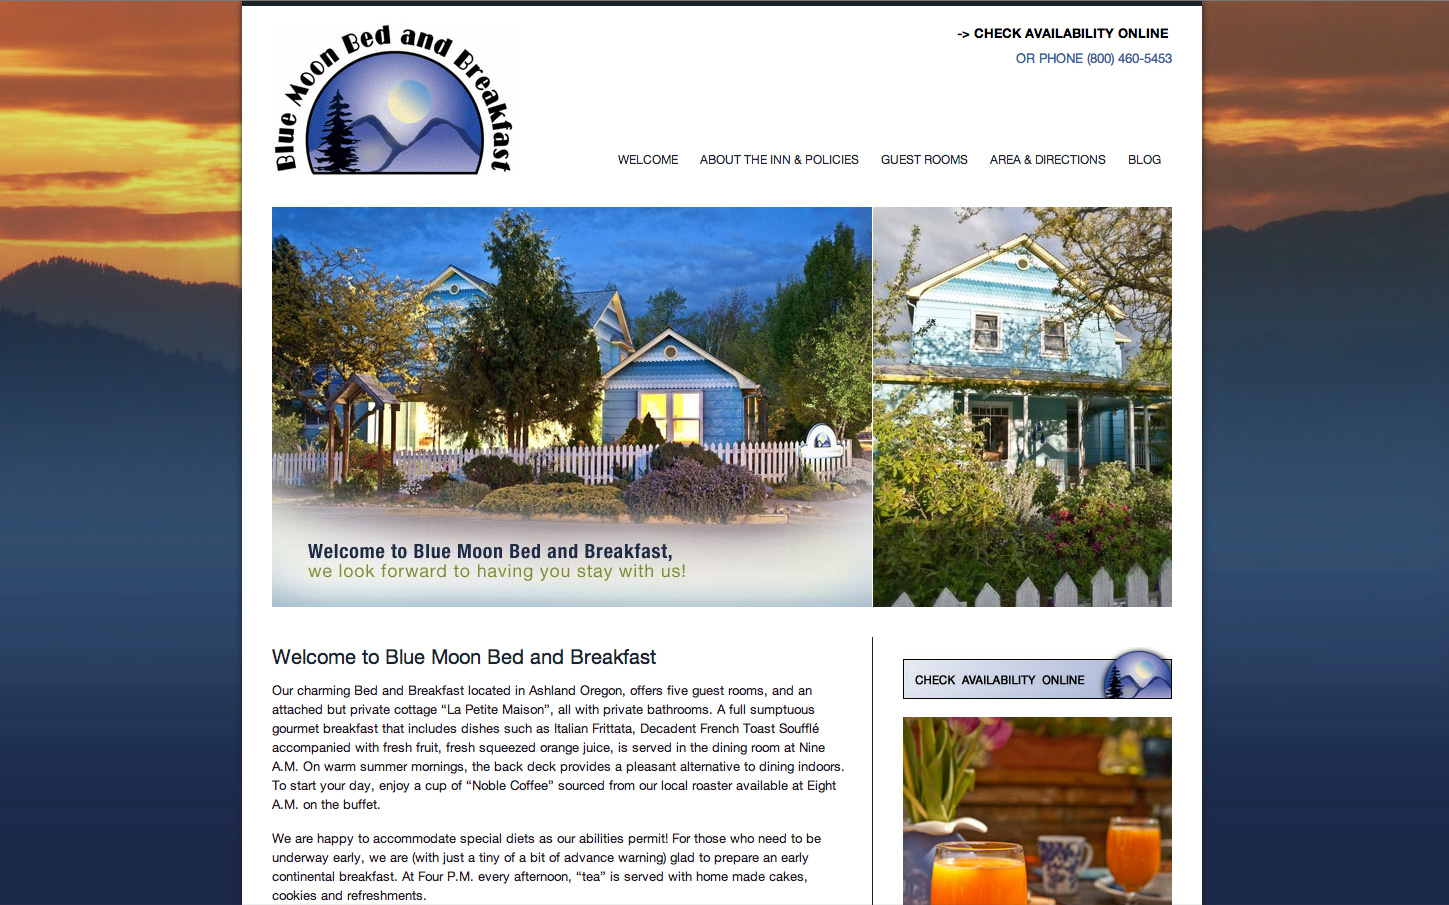 Blue Moon Bed and Breakfast